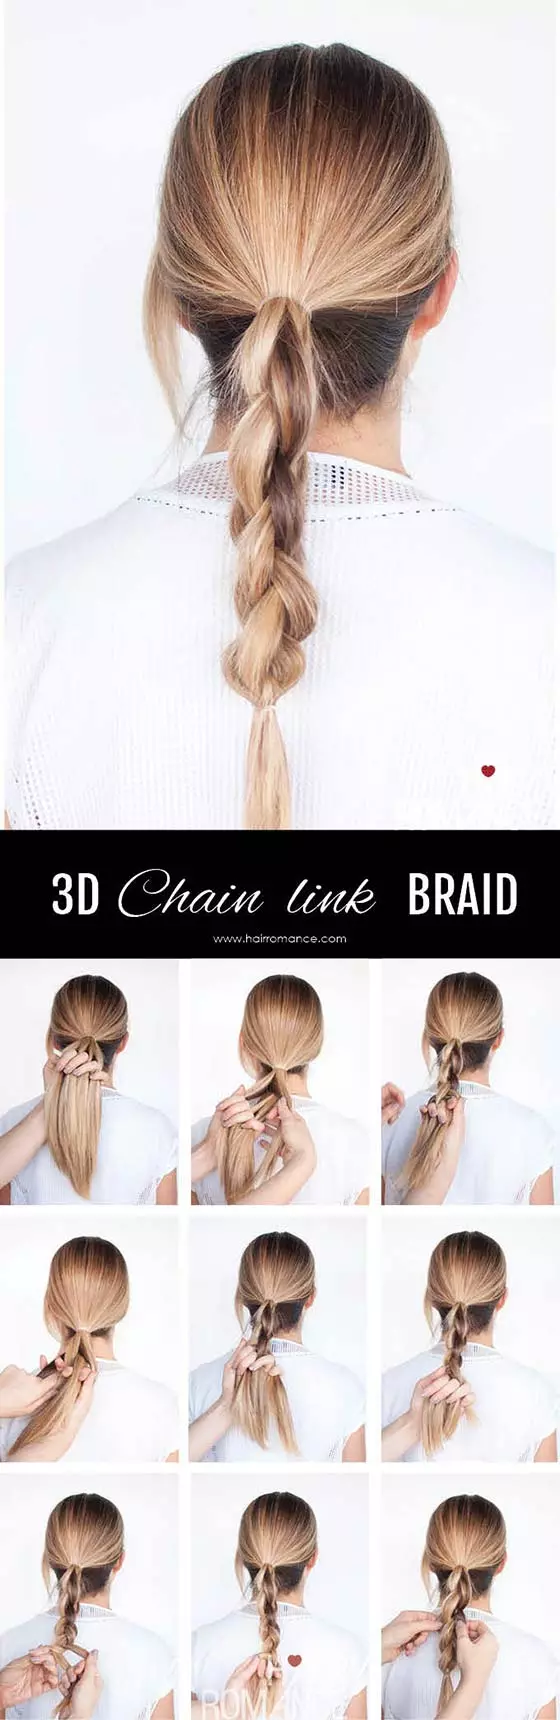 3D chain link braided hairstyle for long hair